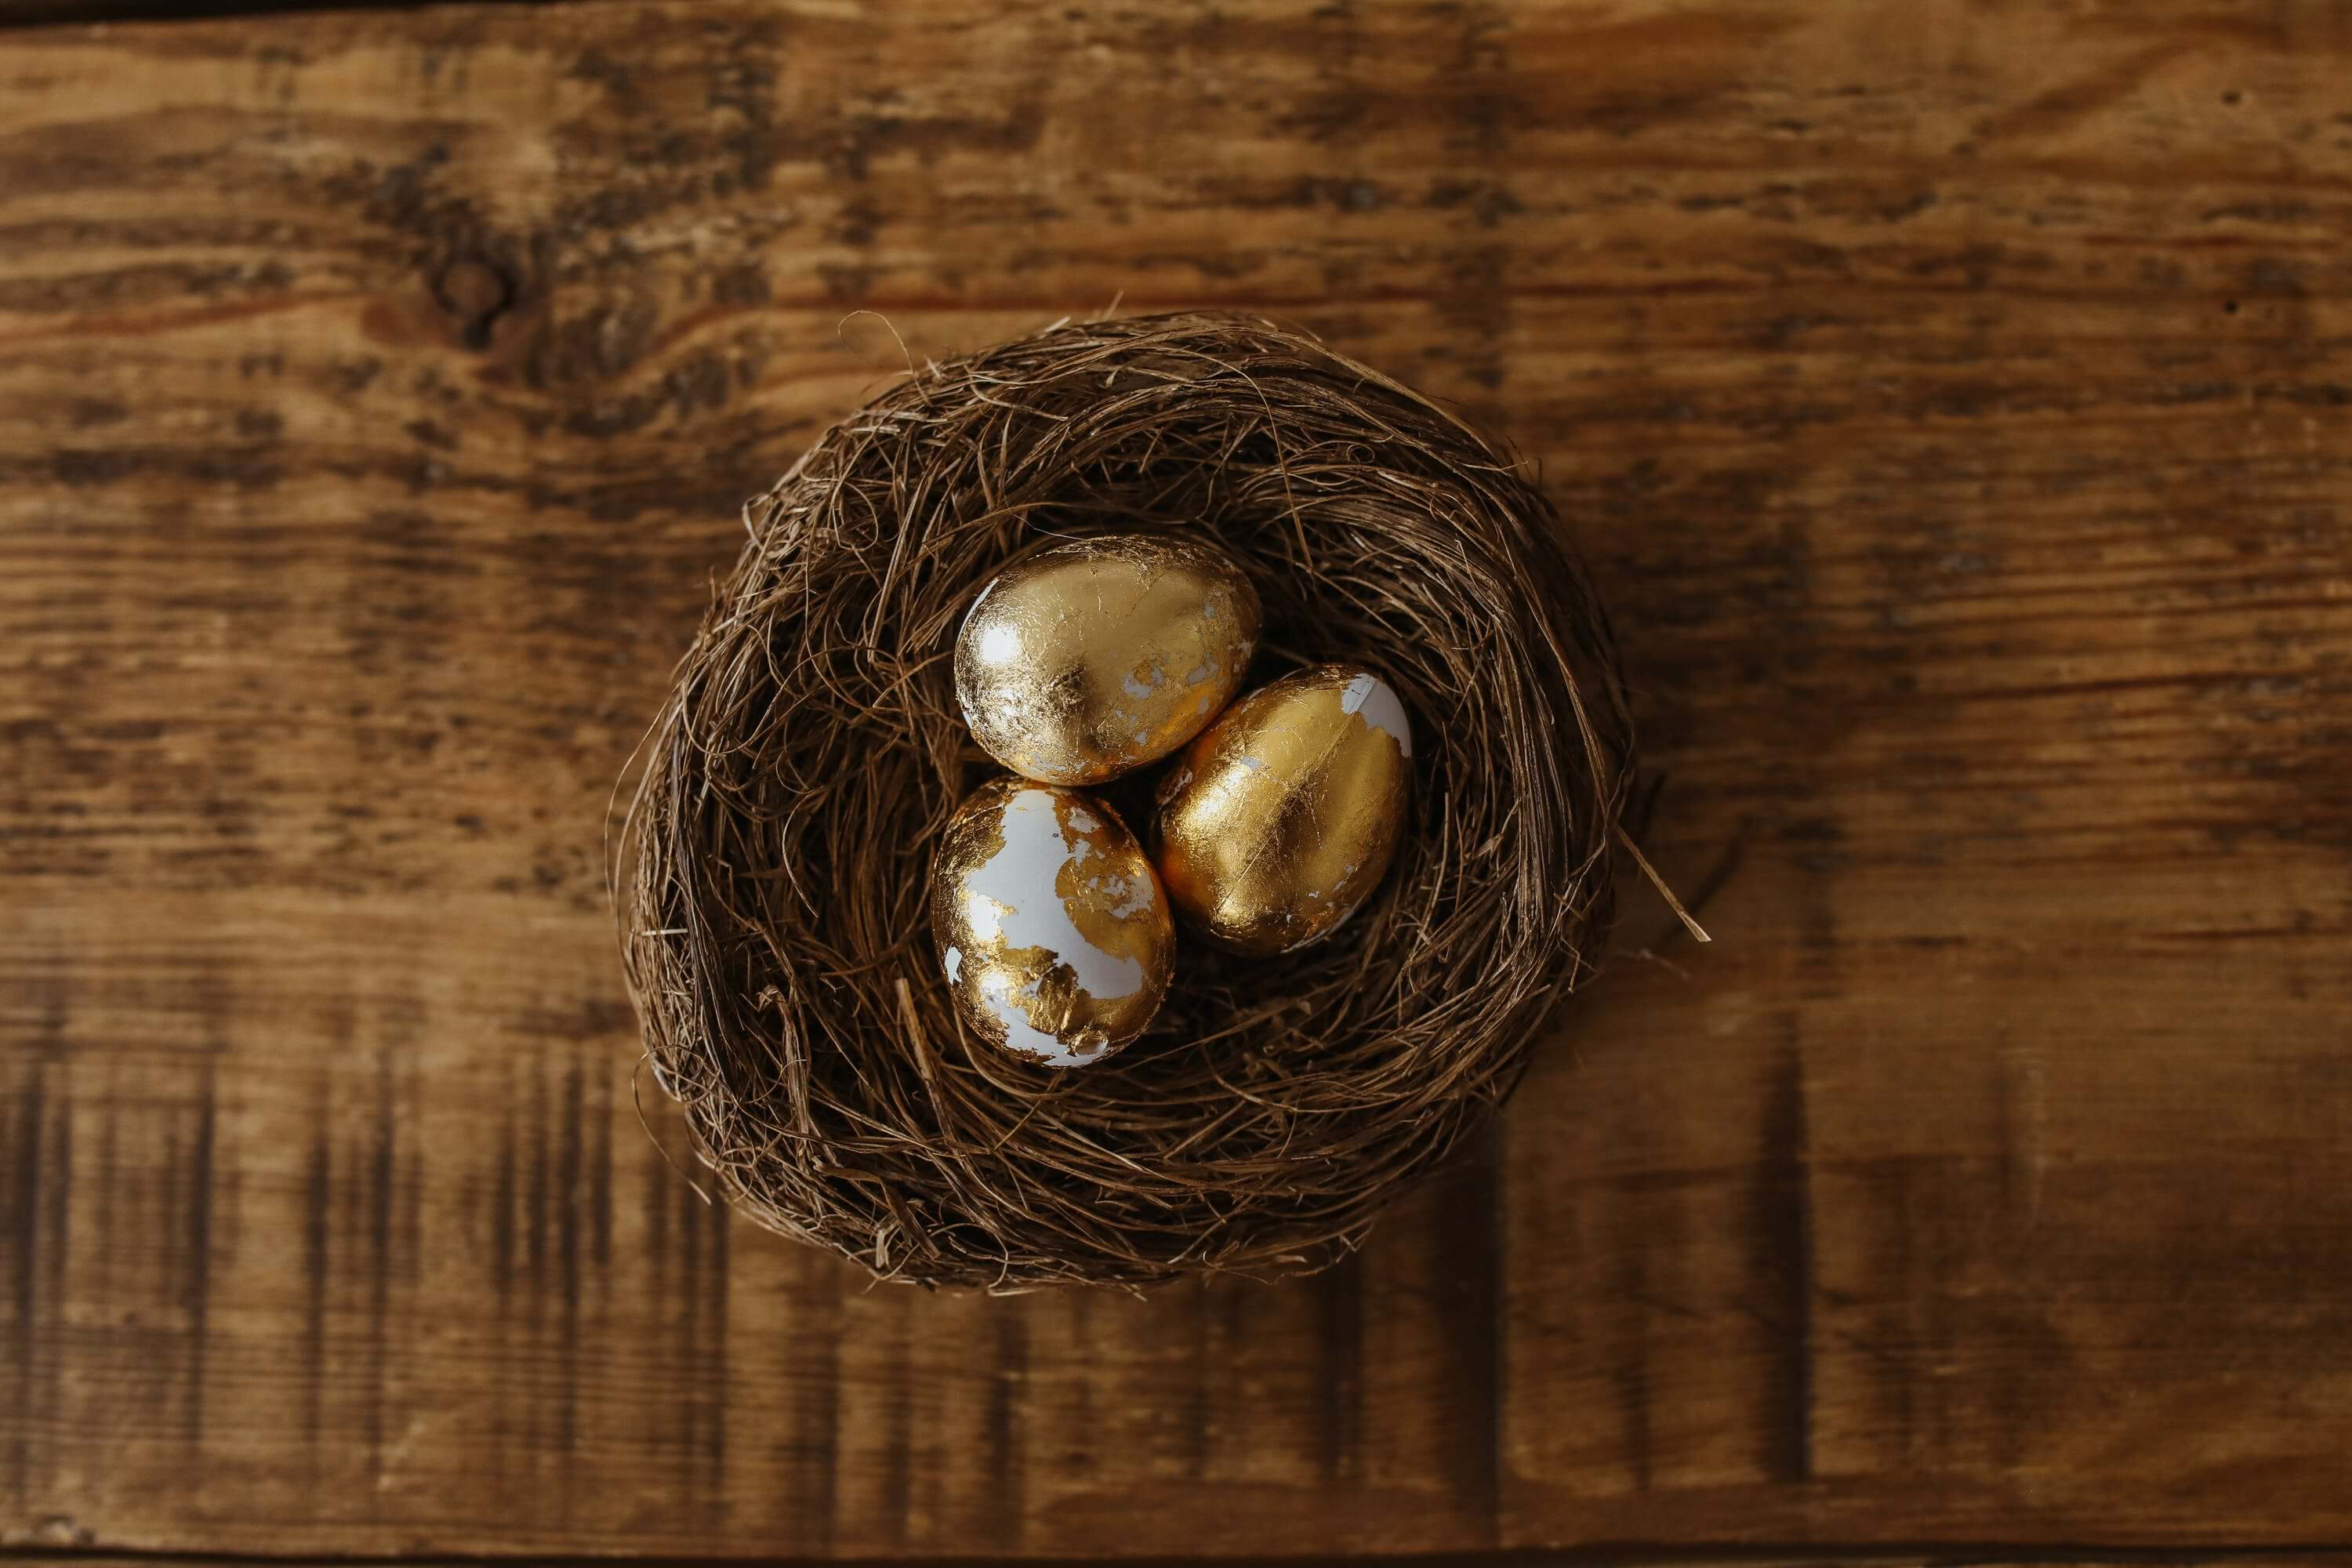 Photo by Polina Tankilevitch: https://www.pexels.com/photo/small-white-eggs-with-gold-paint-6625217/